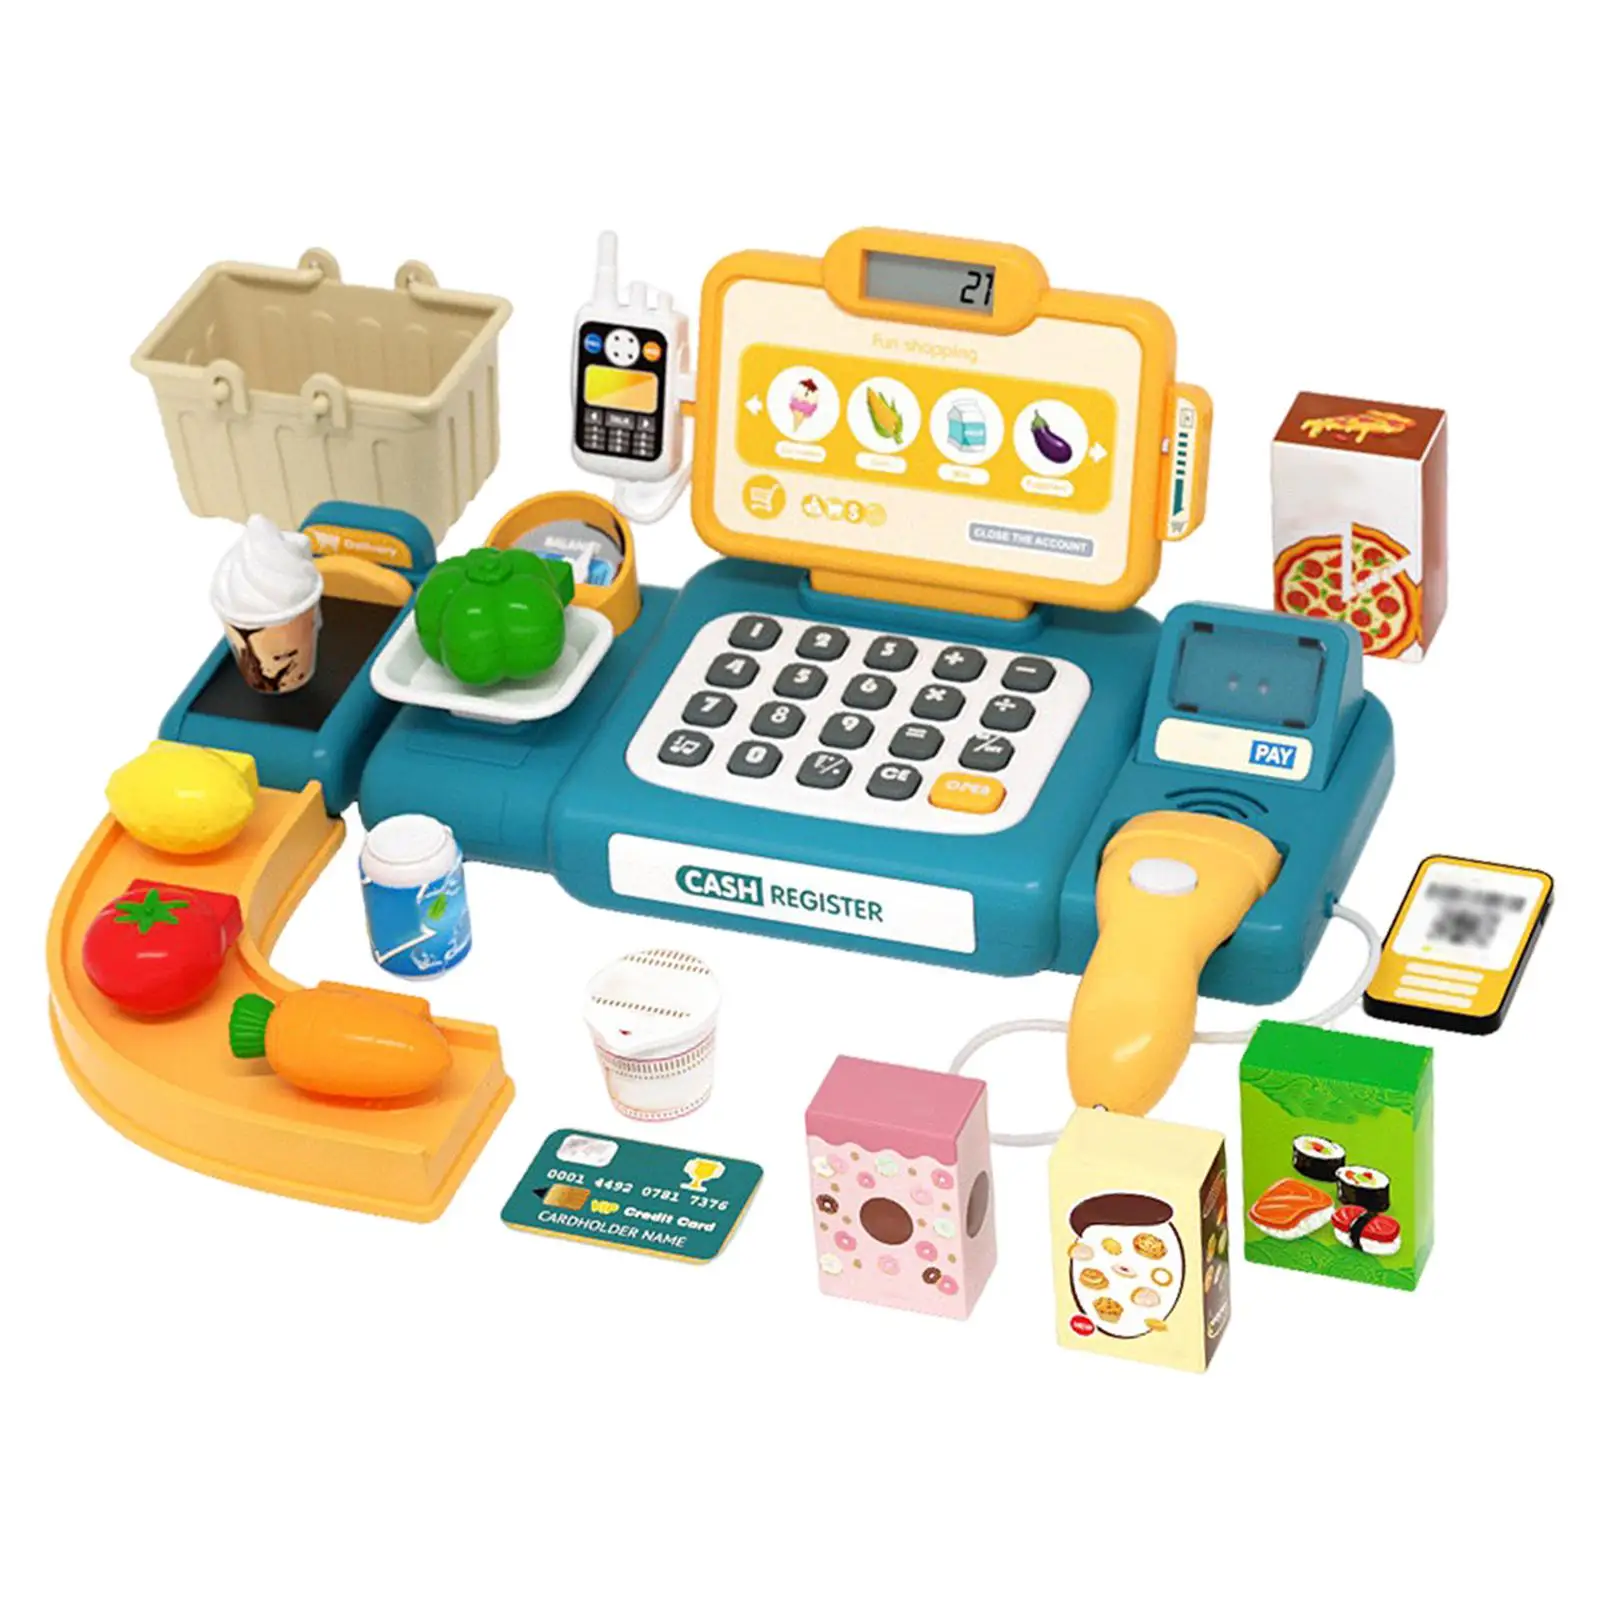 Pretend Play Store Imaginative Realistic Multifunctional Educational Electronic Classic Count Toy for Role Play Store